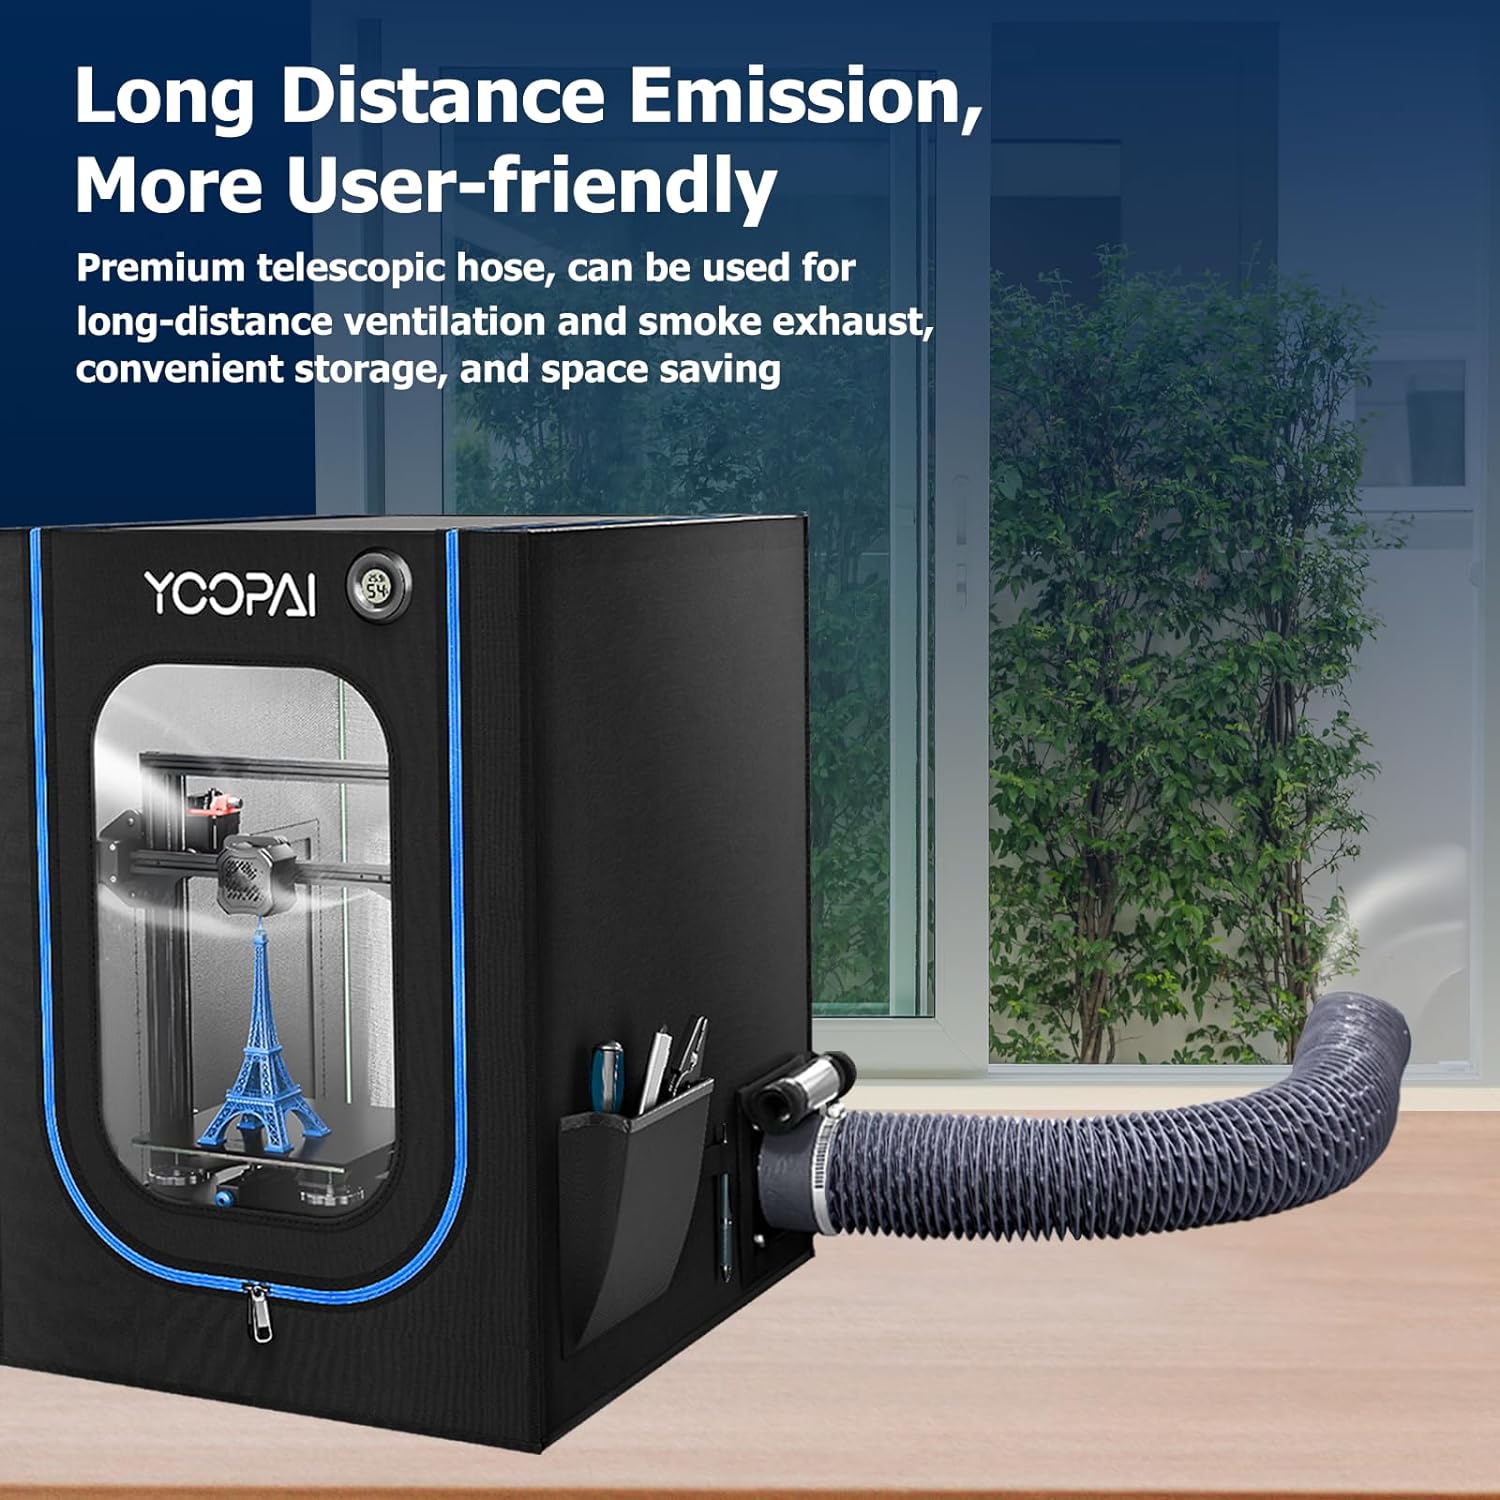 yoopai-fan-fume-extraction-kit-for-3d-printer-enclosure-exhaust-pipe-with-low-noise-exhaust-fan-efficient-ventilation-ex-4 YOOPAI Fan Fume Extraction Kit Review